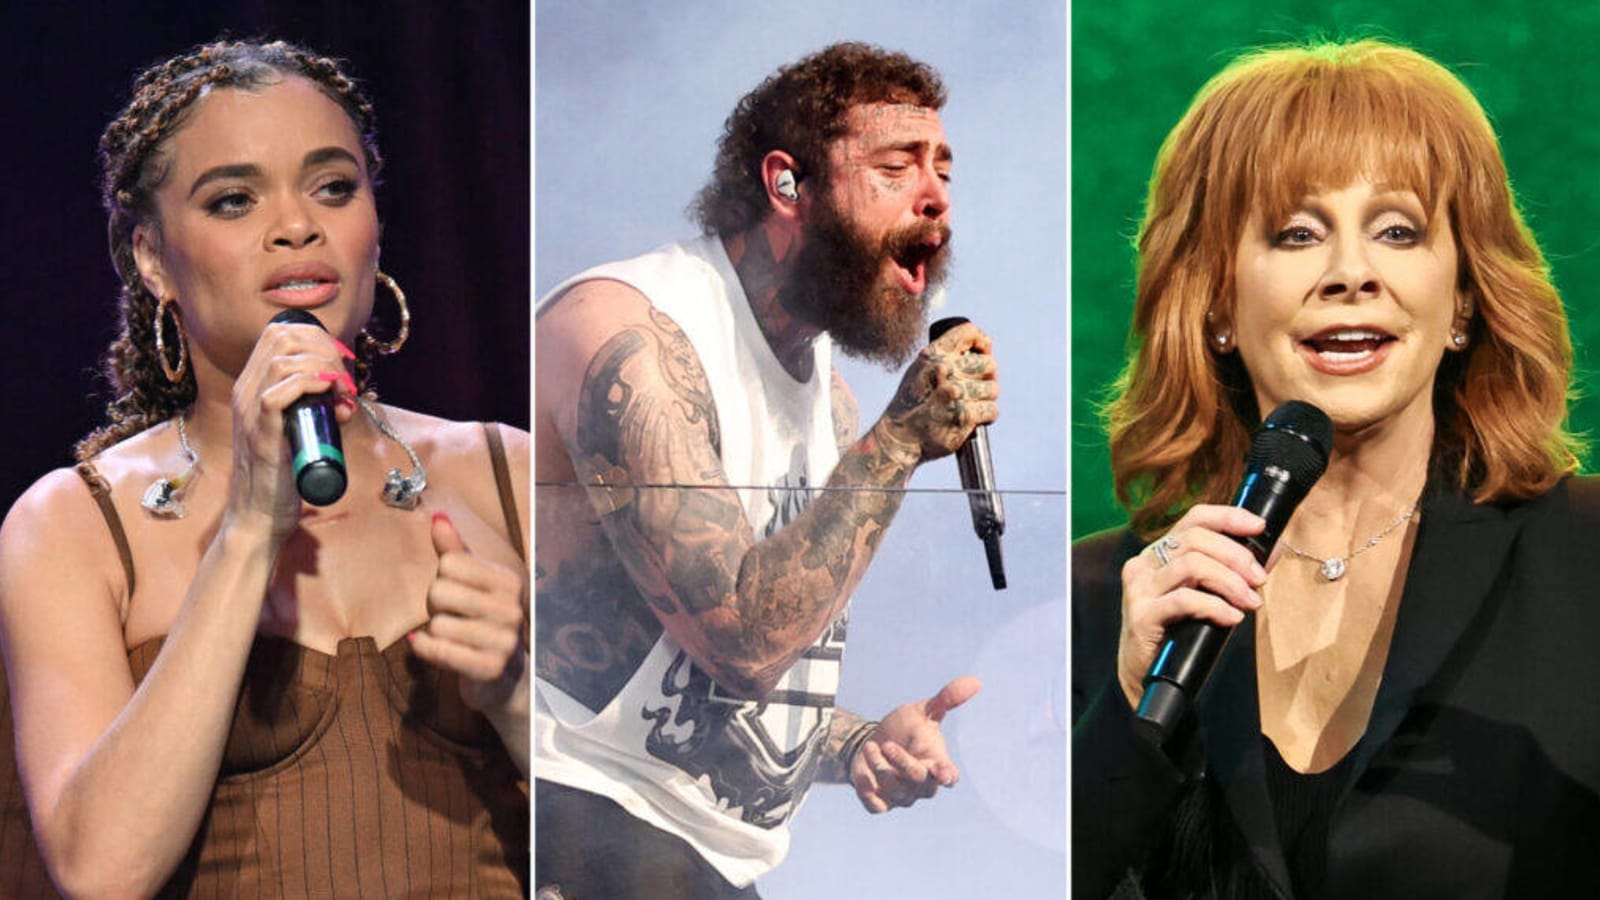 ‘Super Bowl’: Reba McEntire, Post Malone & Andra Day Announced as Pre-Game Performers